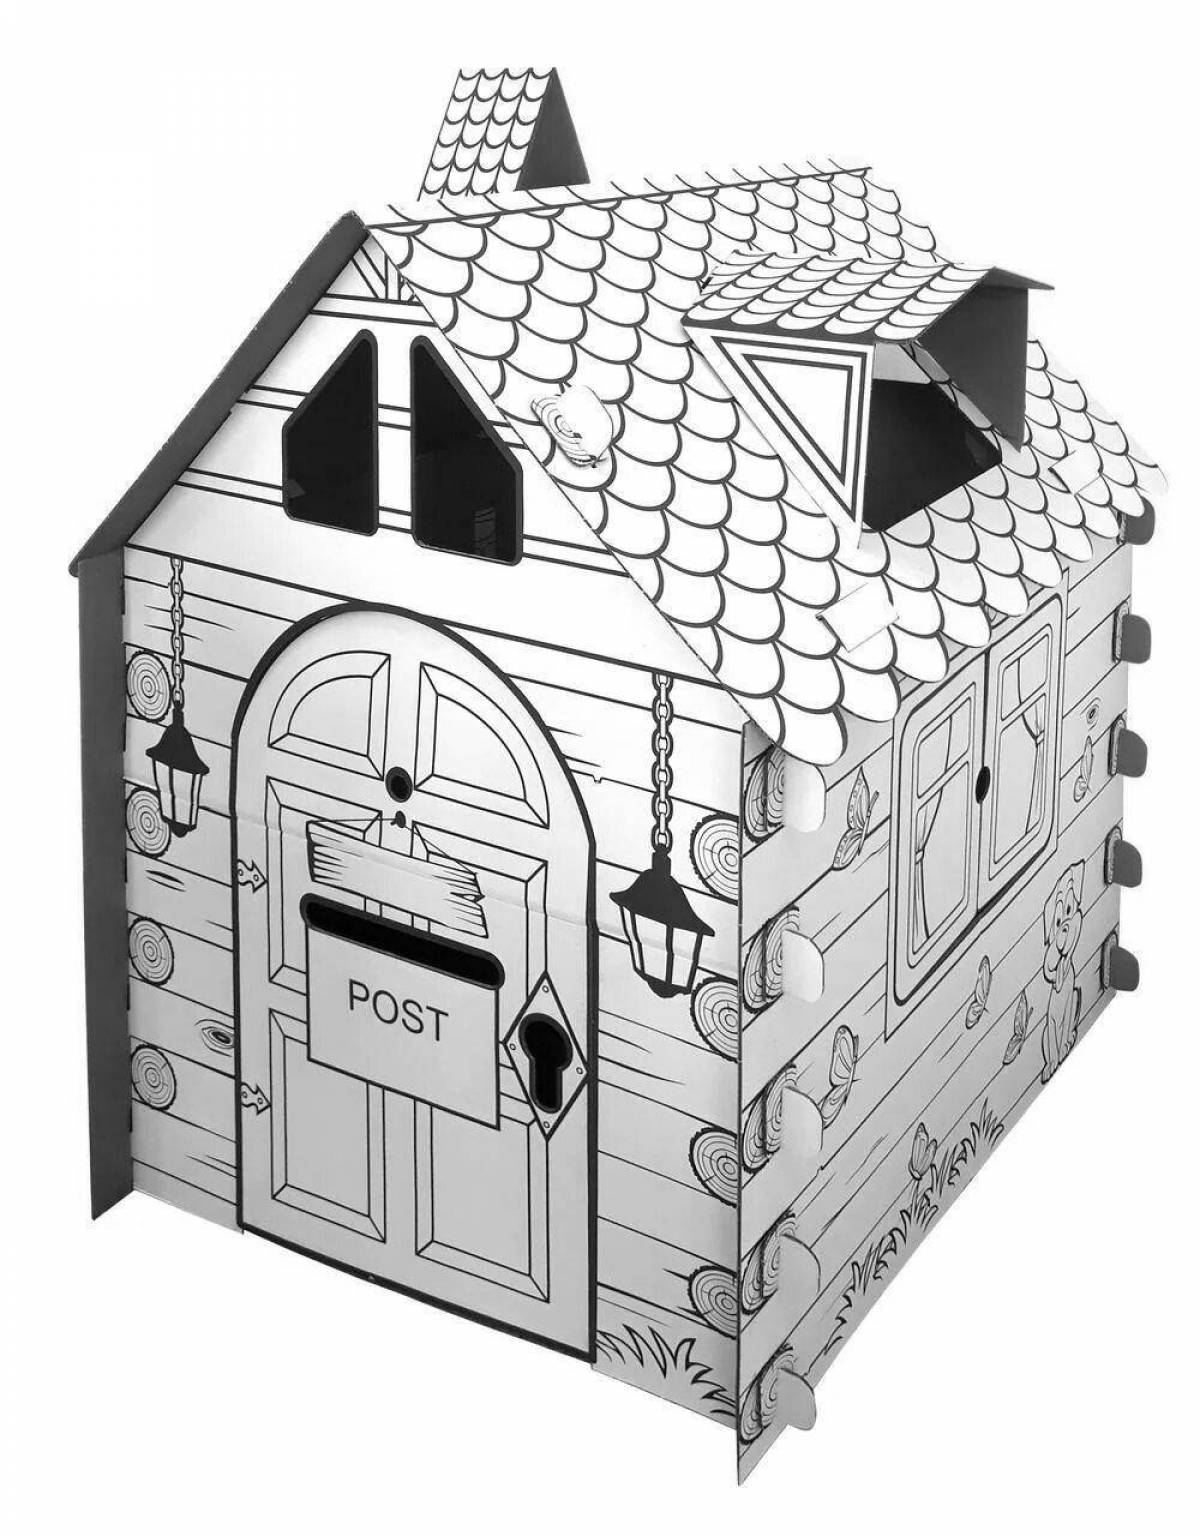 Gorgeous coloring of a cardboard house for children